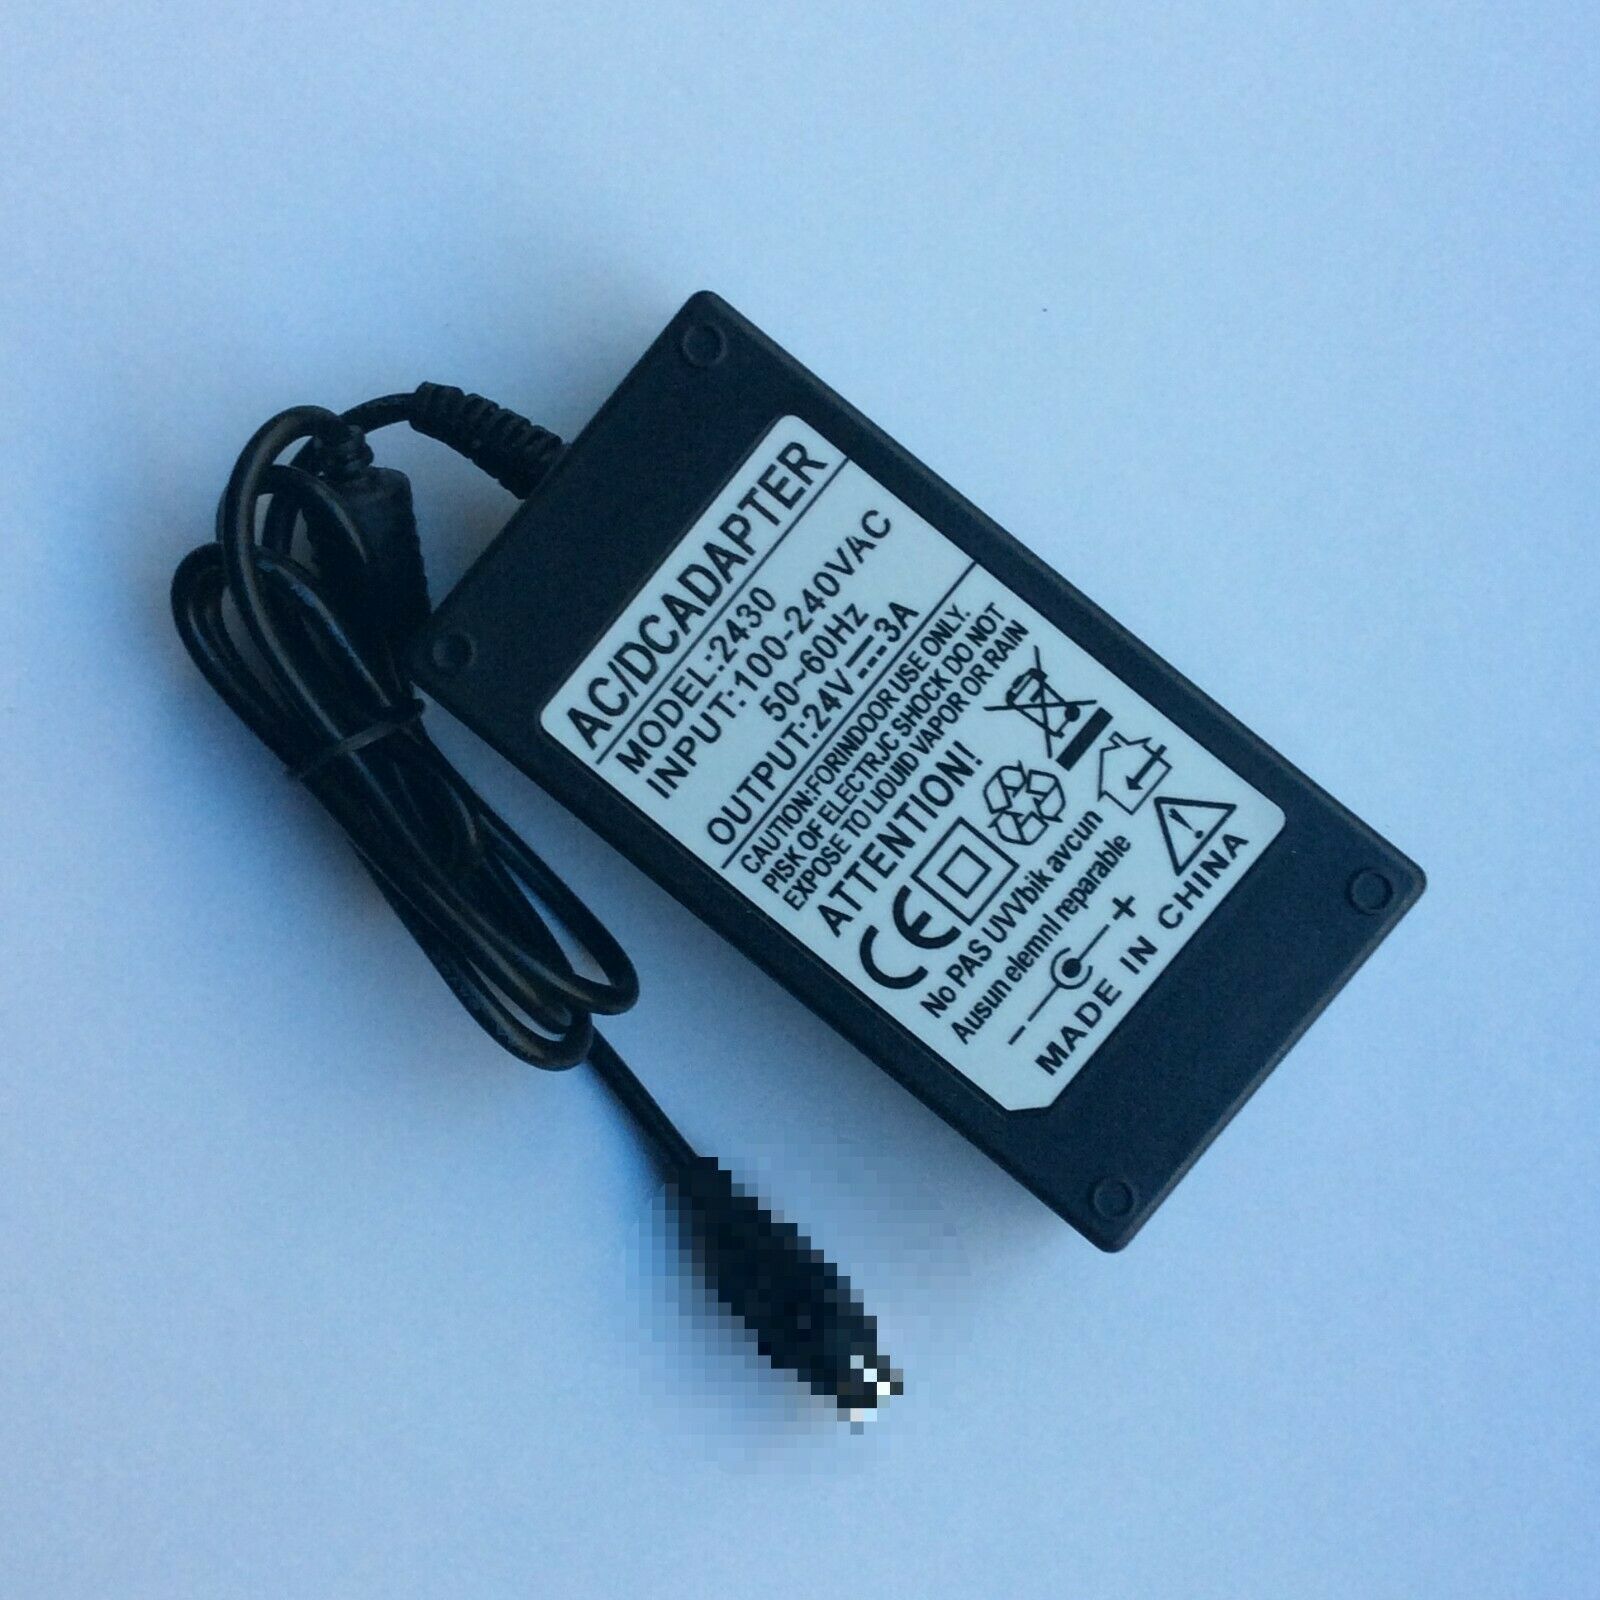 Power supply for Zebra AC Adapter SAWA-52-312524 24V 3.75A upgrade Power Supply Adapter cord for